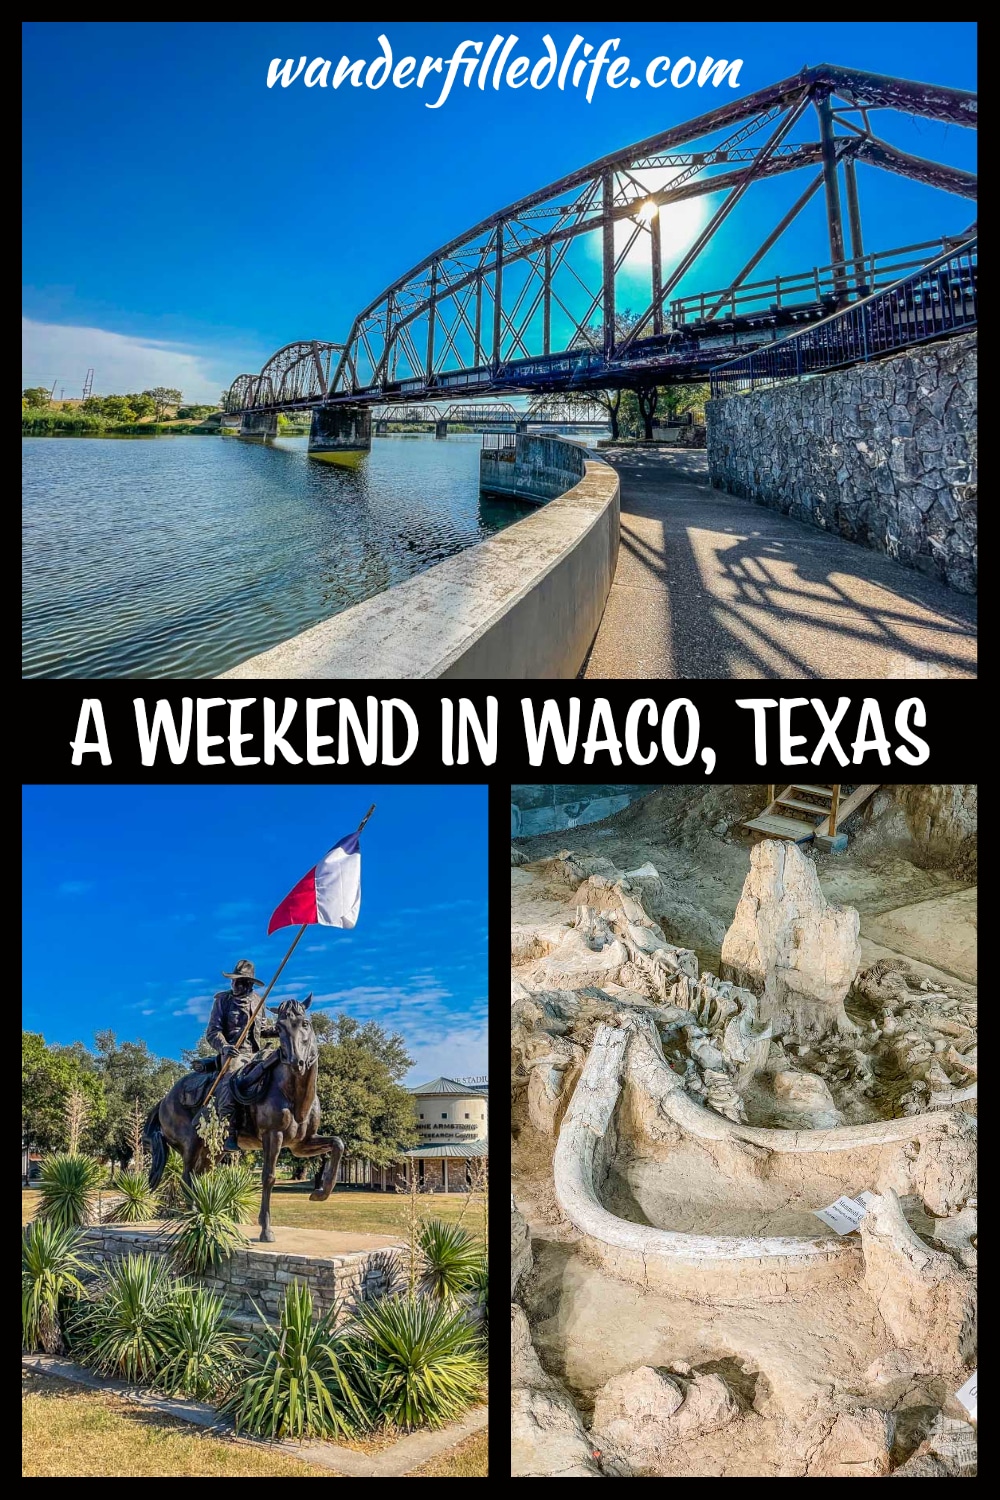 Waco, Texas offers a lot to see and do beyond all things Fixer Upper in a weekend, including exceptional parks, museums and food.